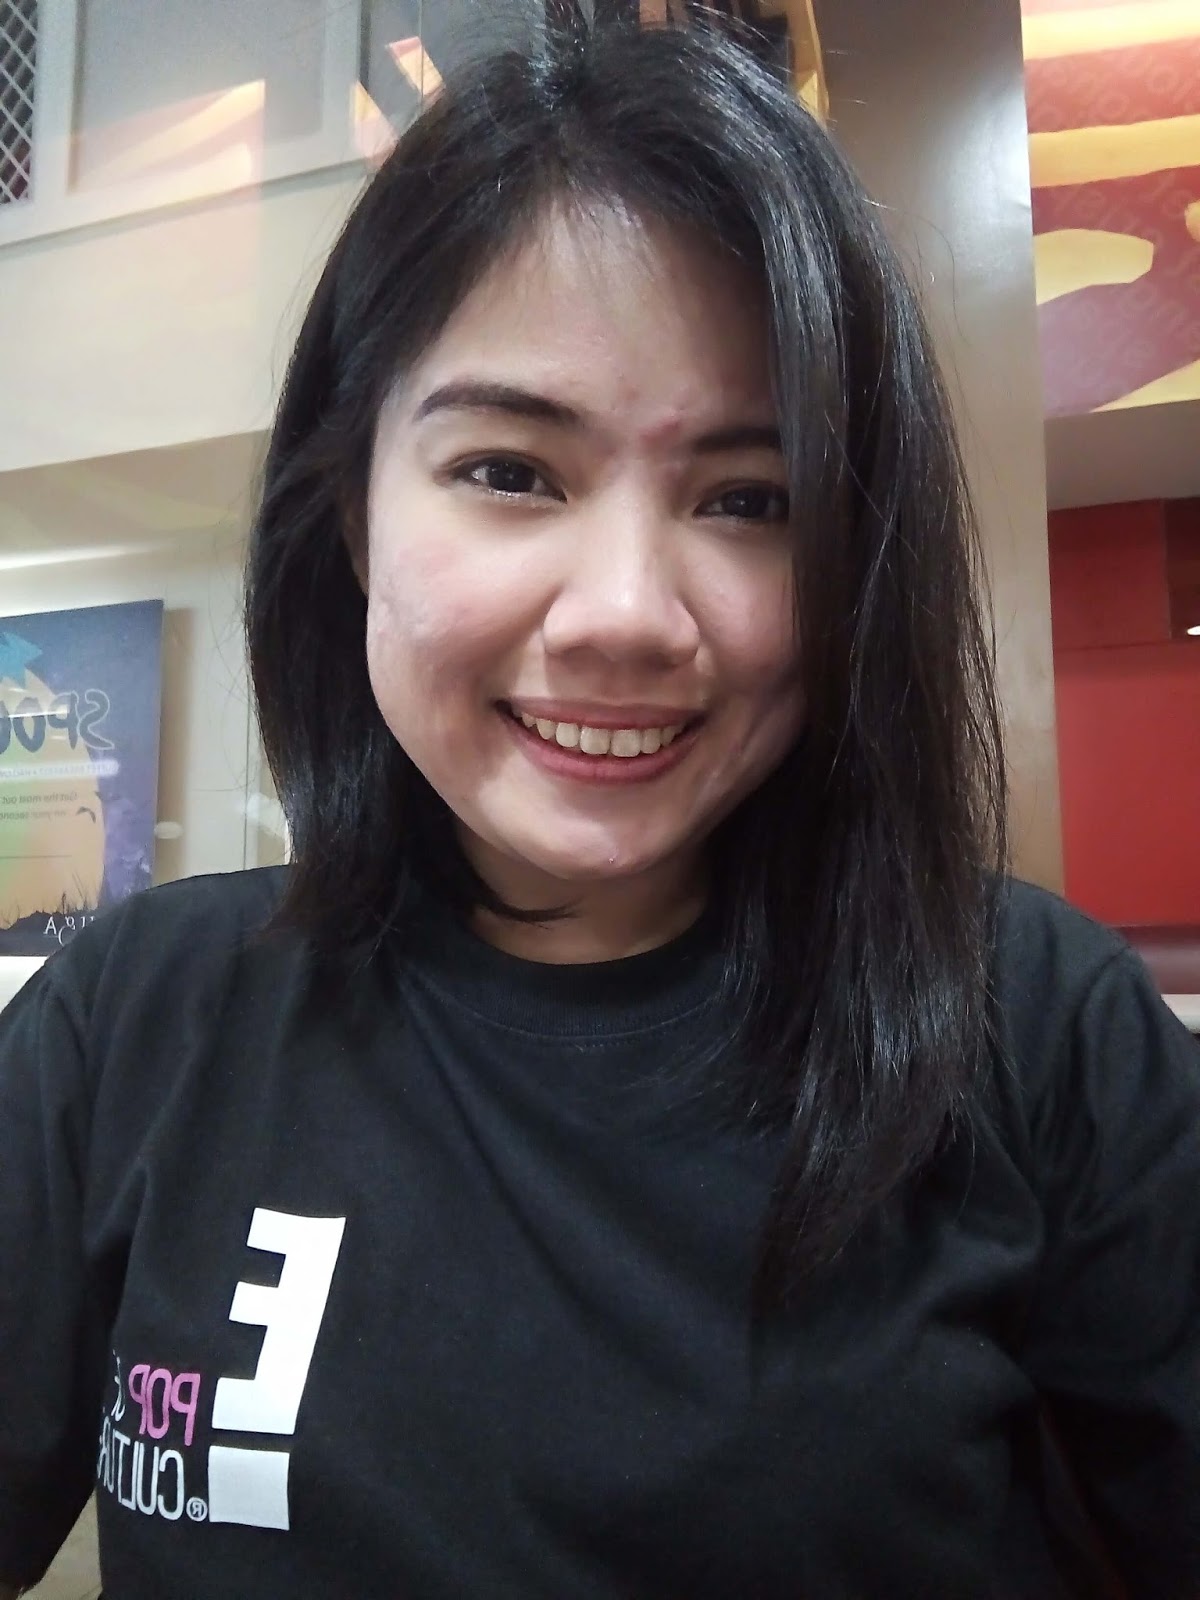 Cloudfone Excite Prime 2 Front Camera Sample - Selfie